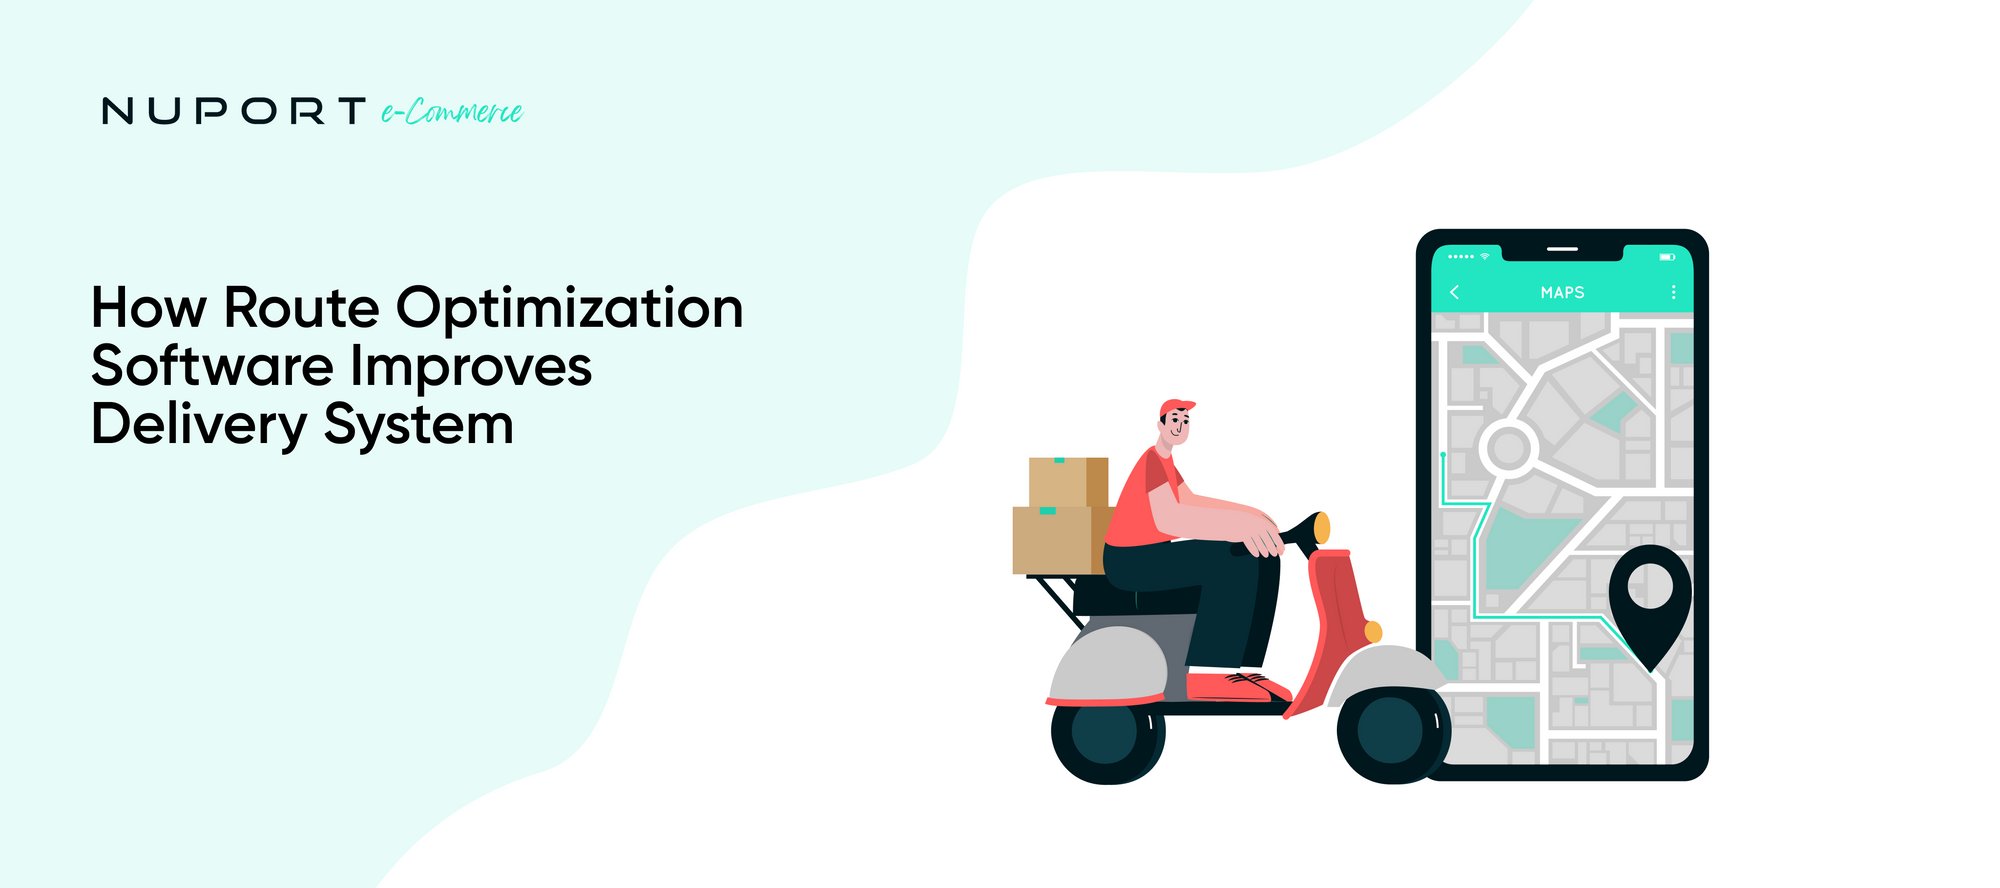 How Route Optimization Software Improves The Life Of The Delivery Executives